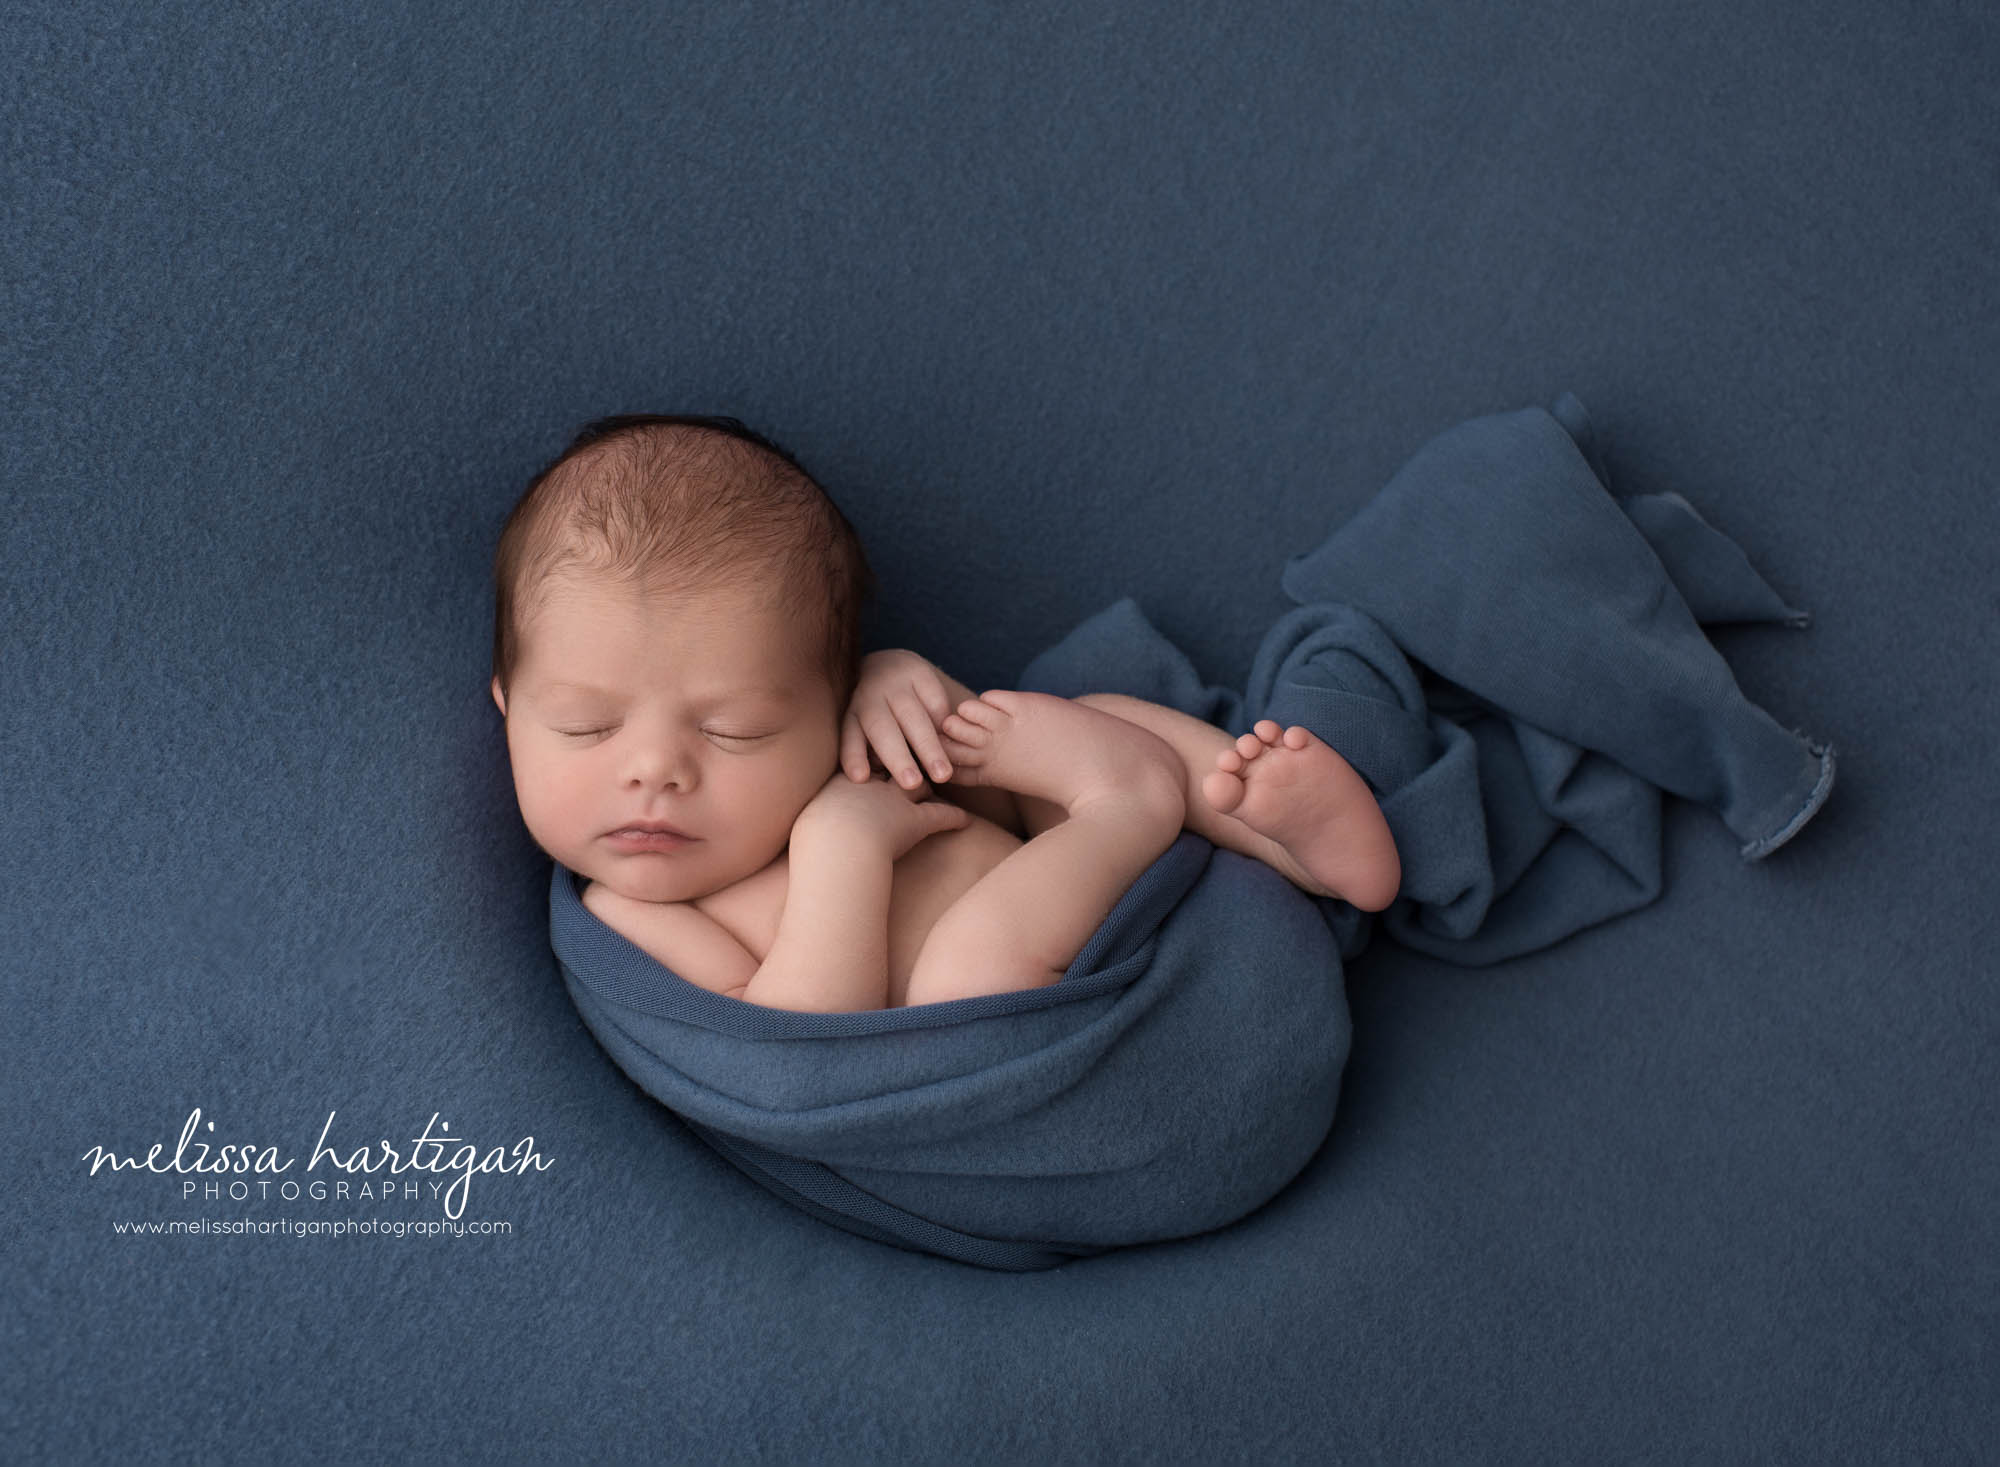 newborn baby boy posed on blue backdrop wrapped in blue wrap newborn photographer scotland ct windham county